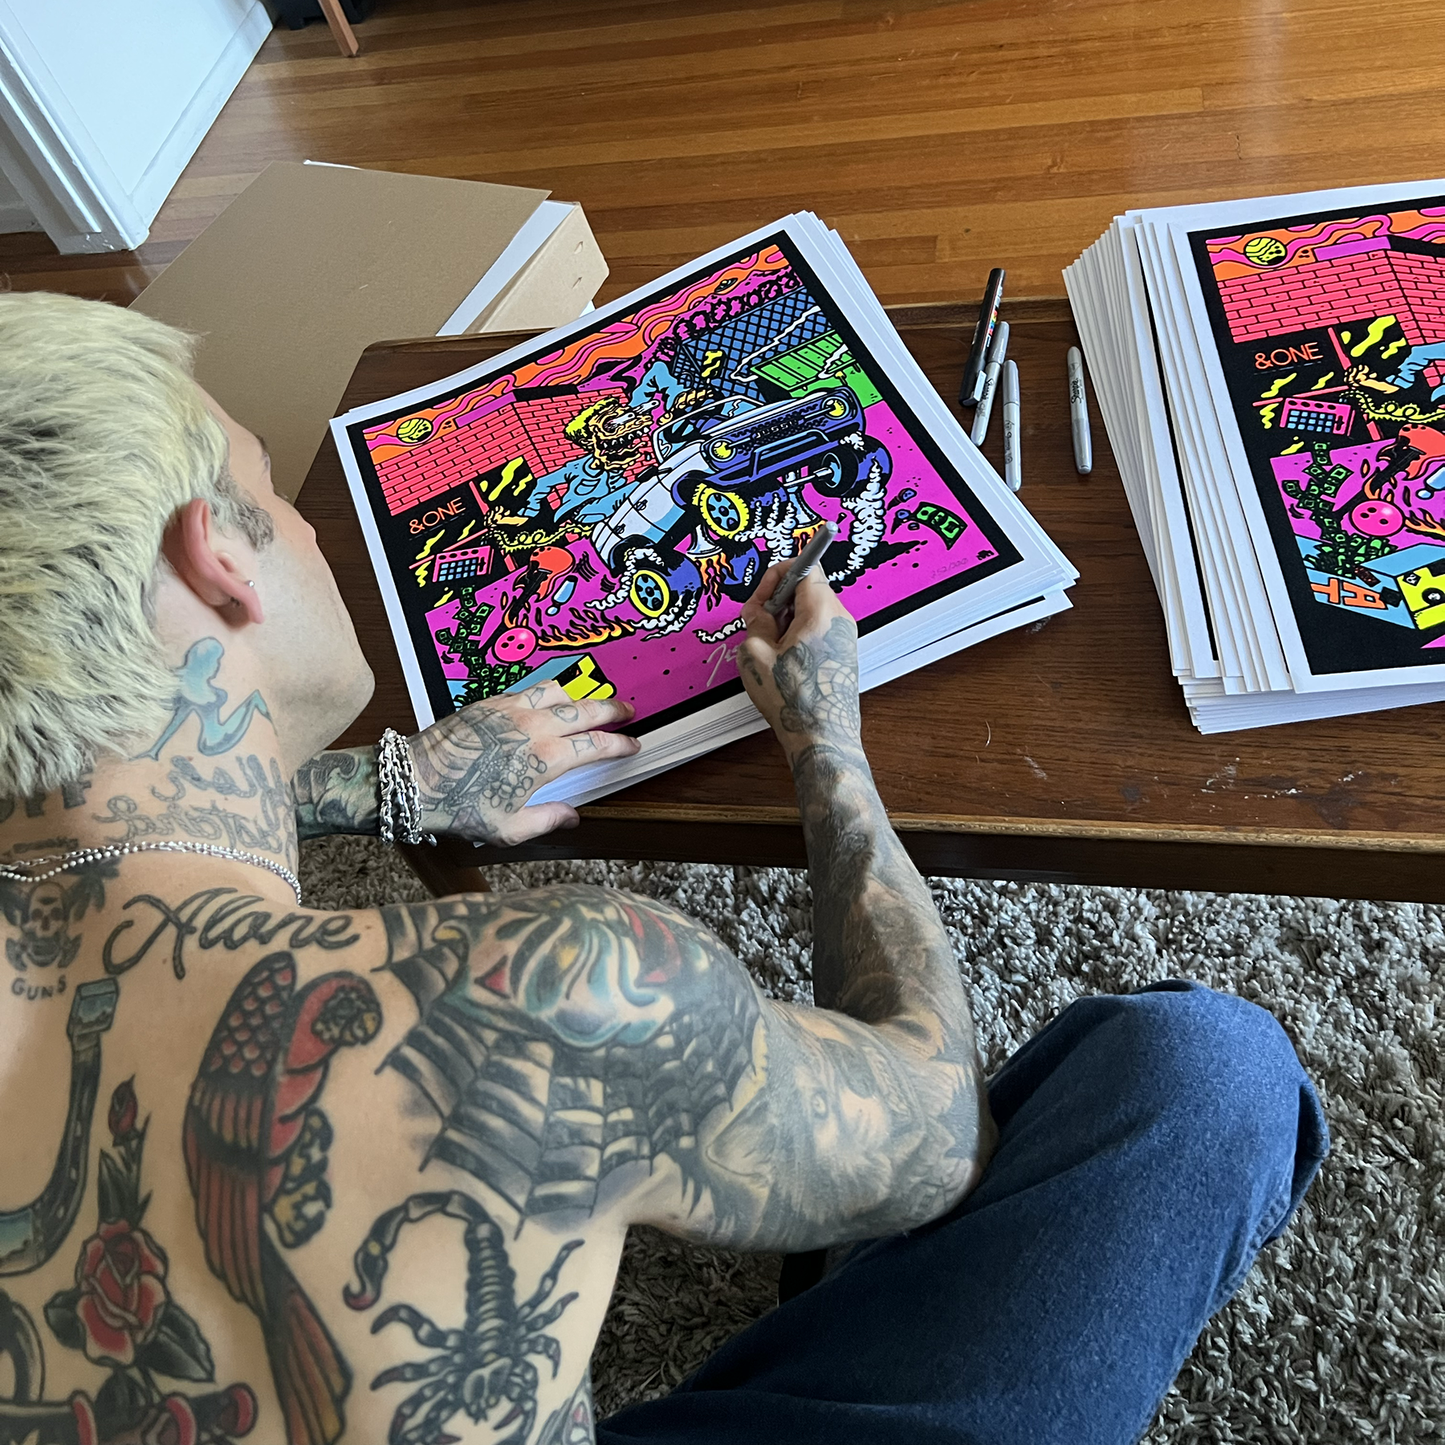 SIGNED & ONE BLACKLIGHT POSTER